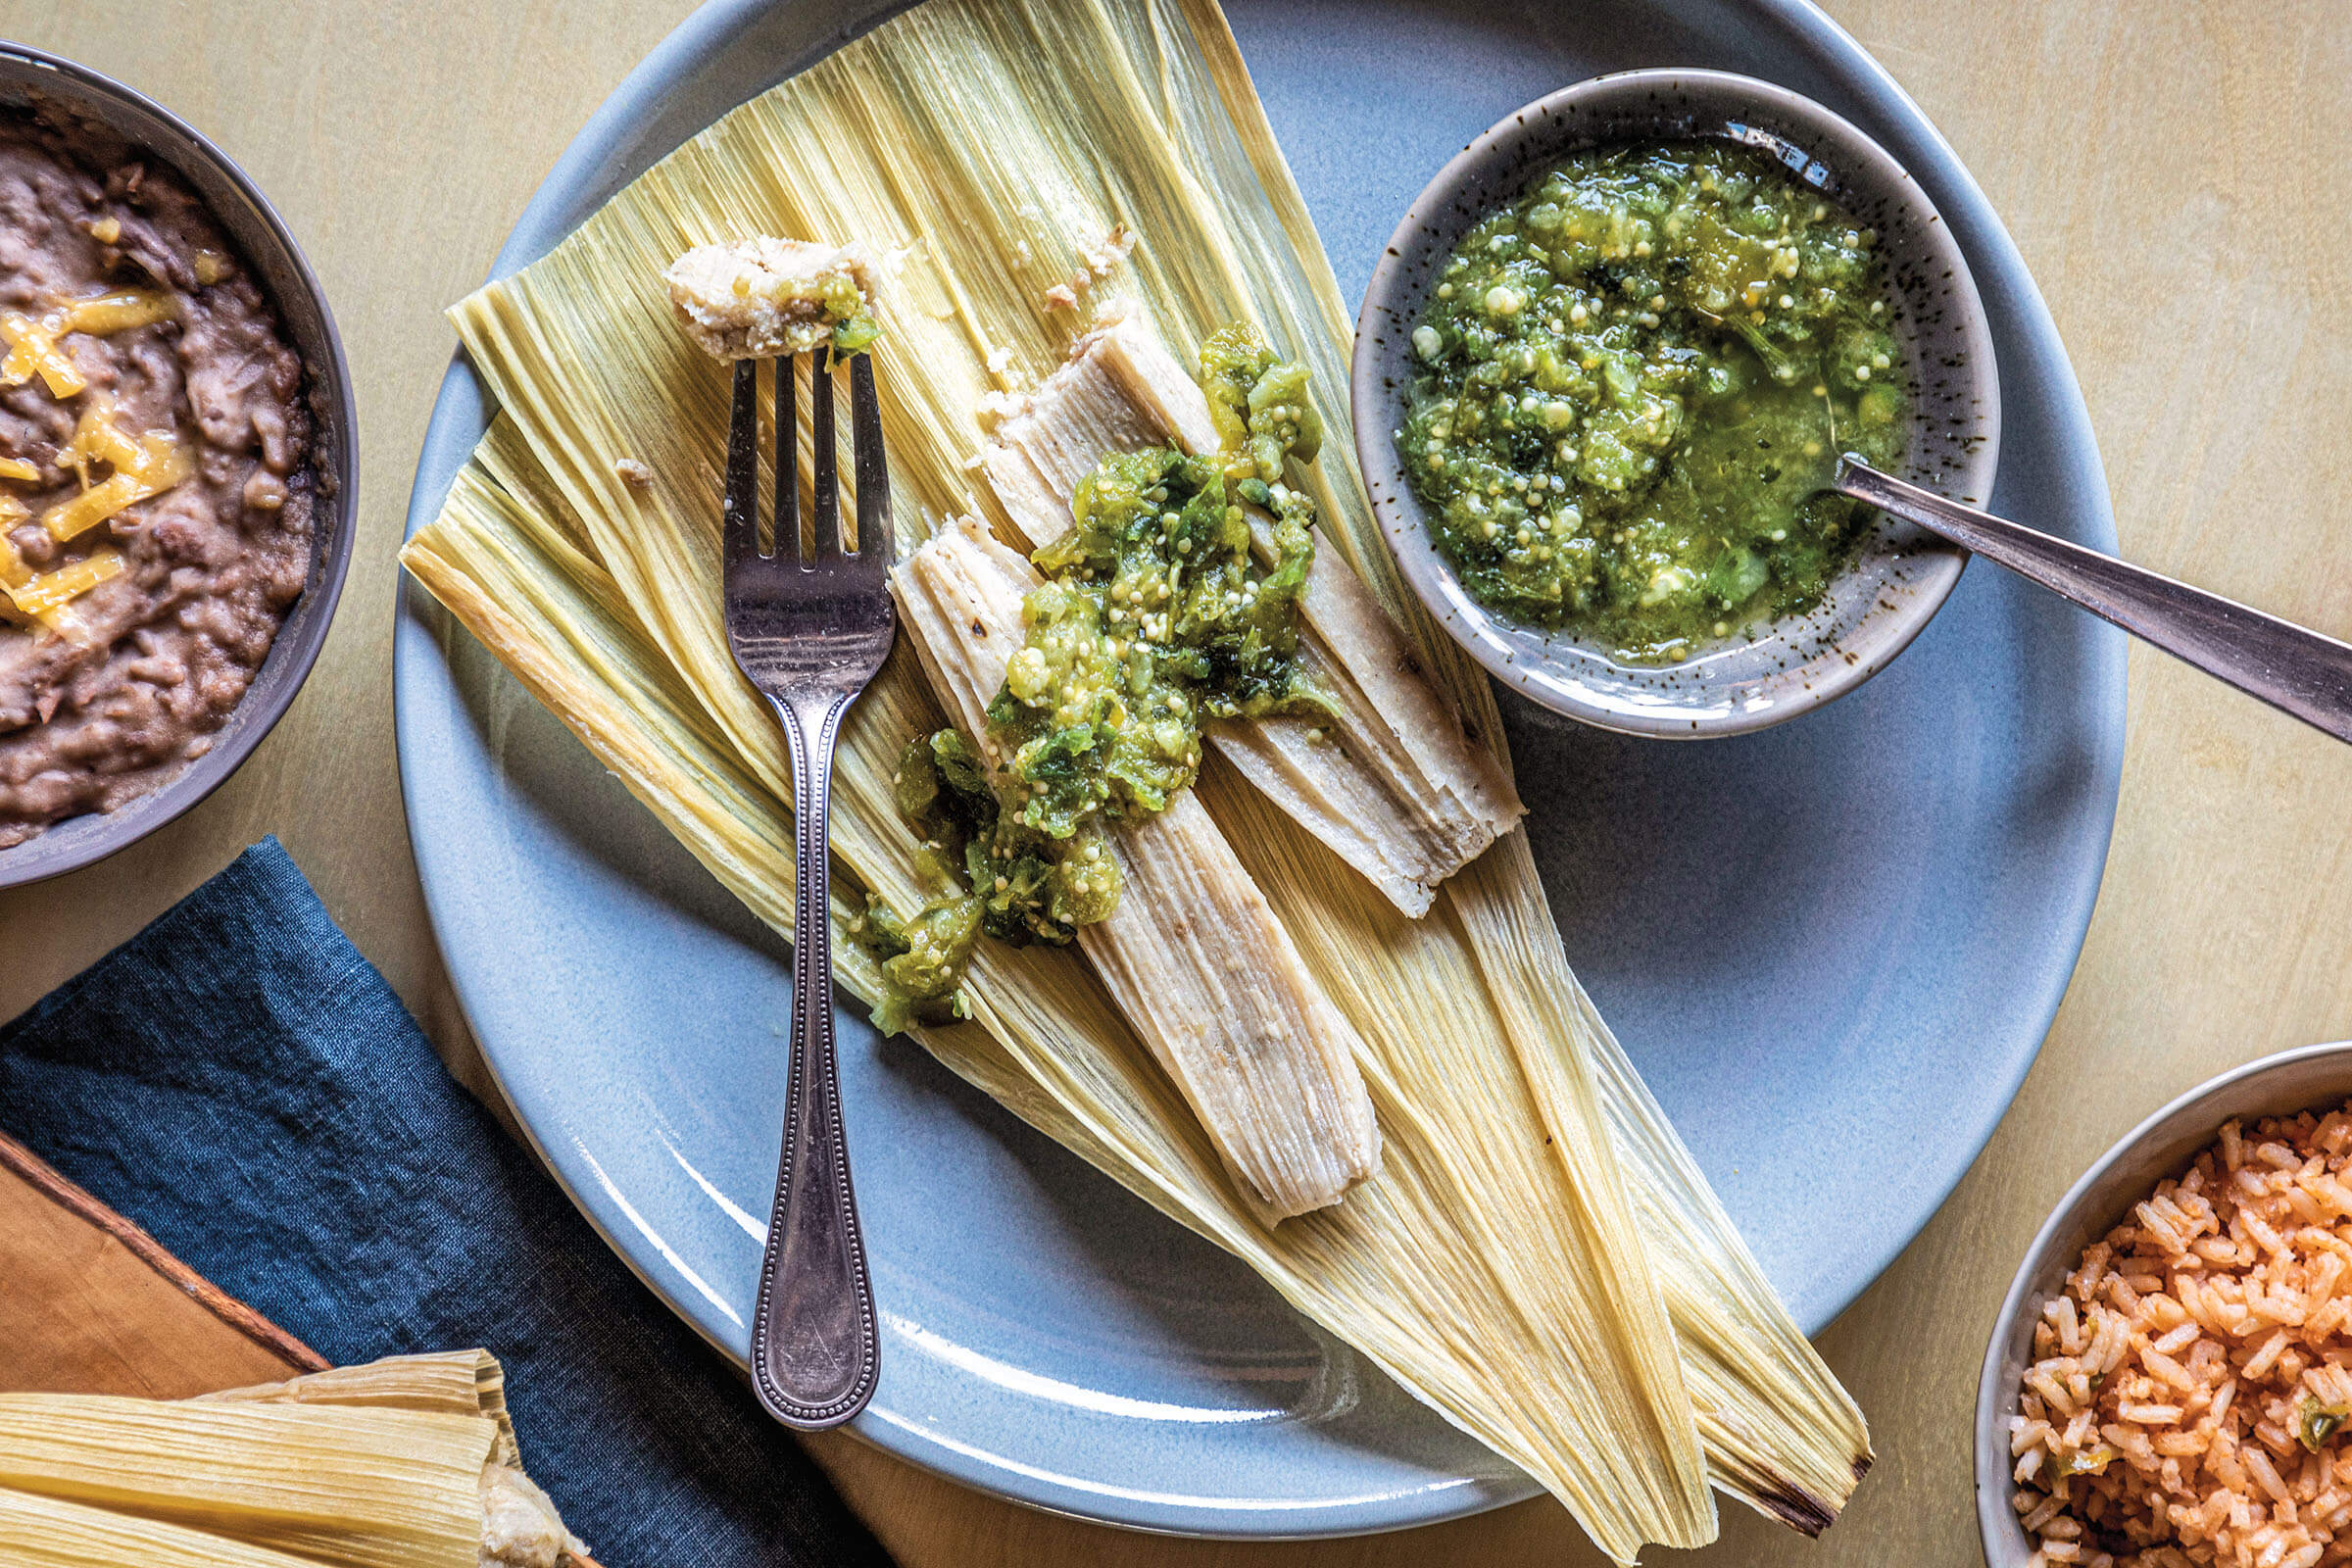 An overhead view of a blue plate of tamales served with green salsa